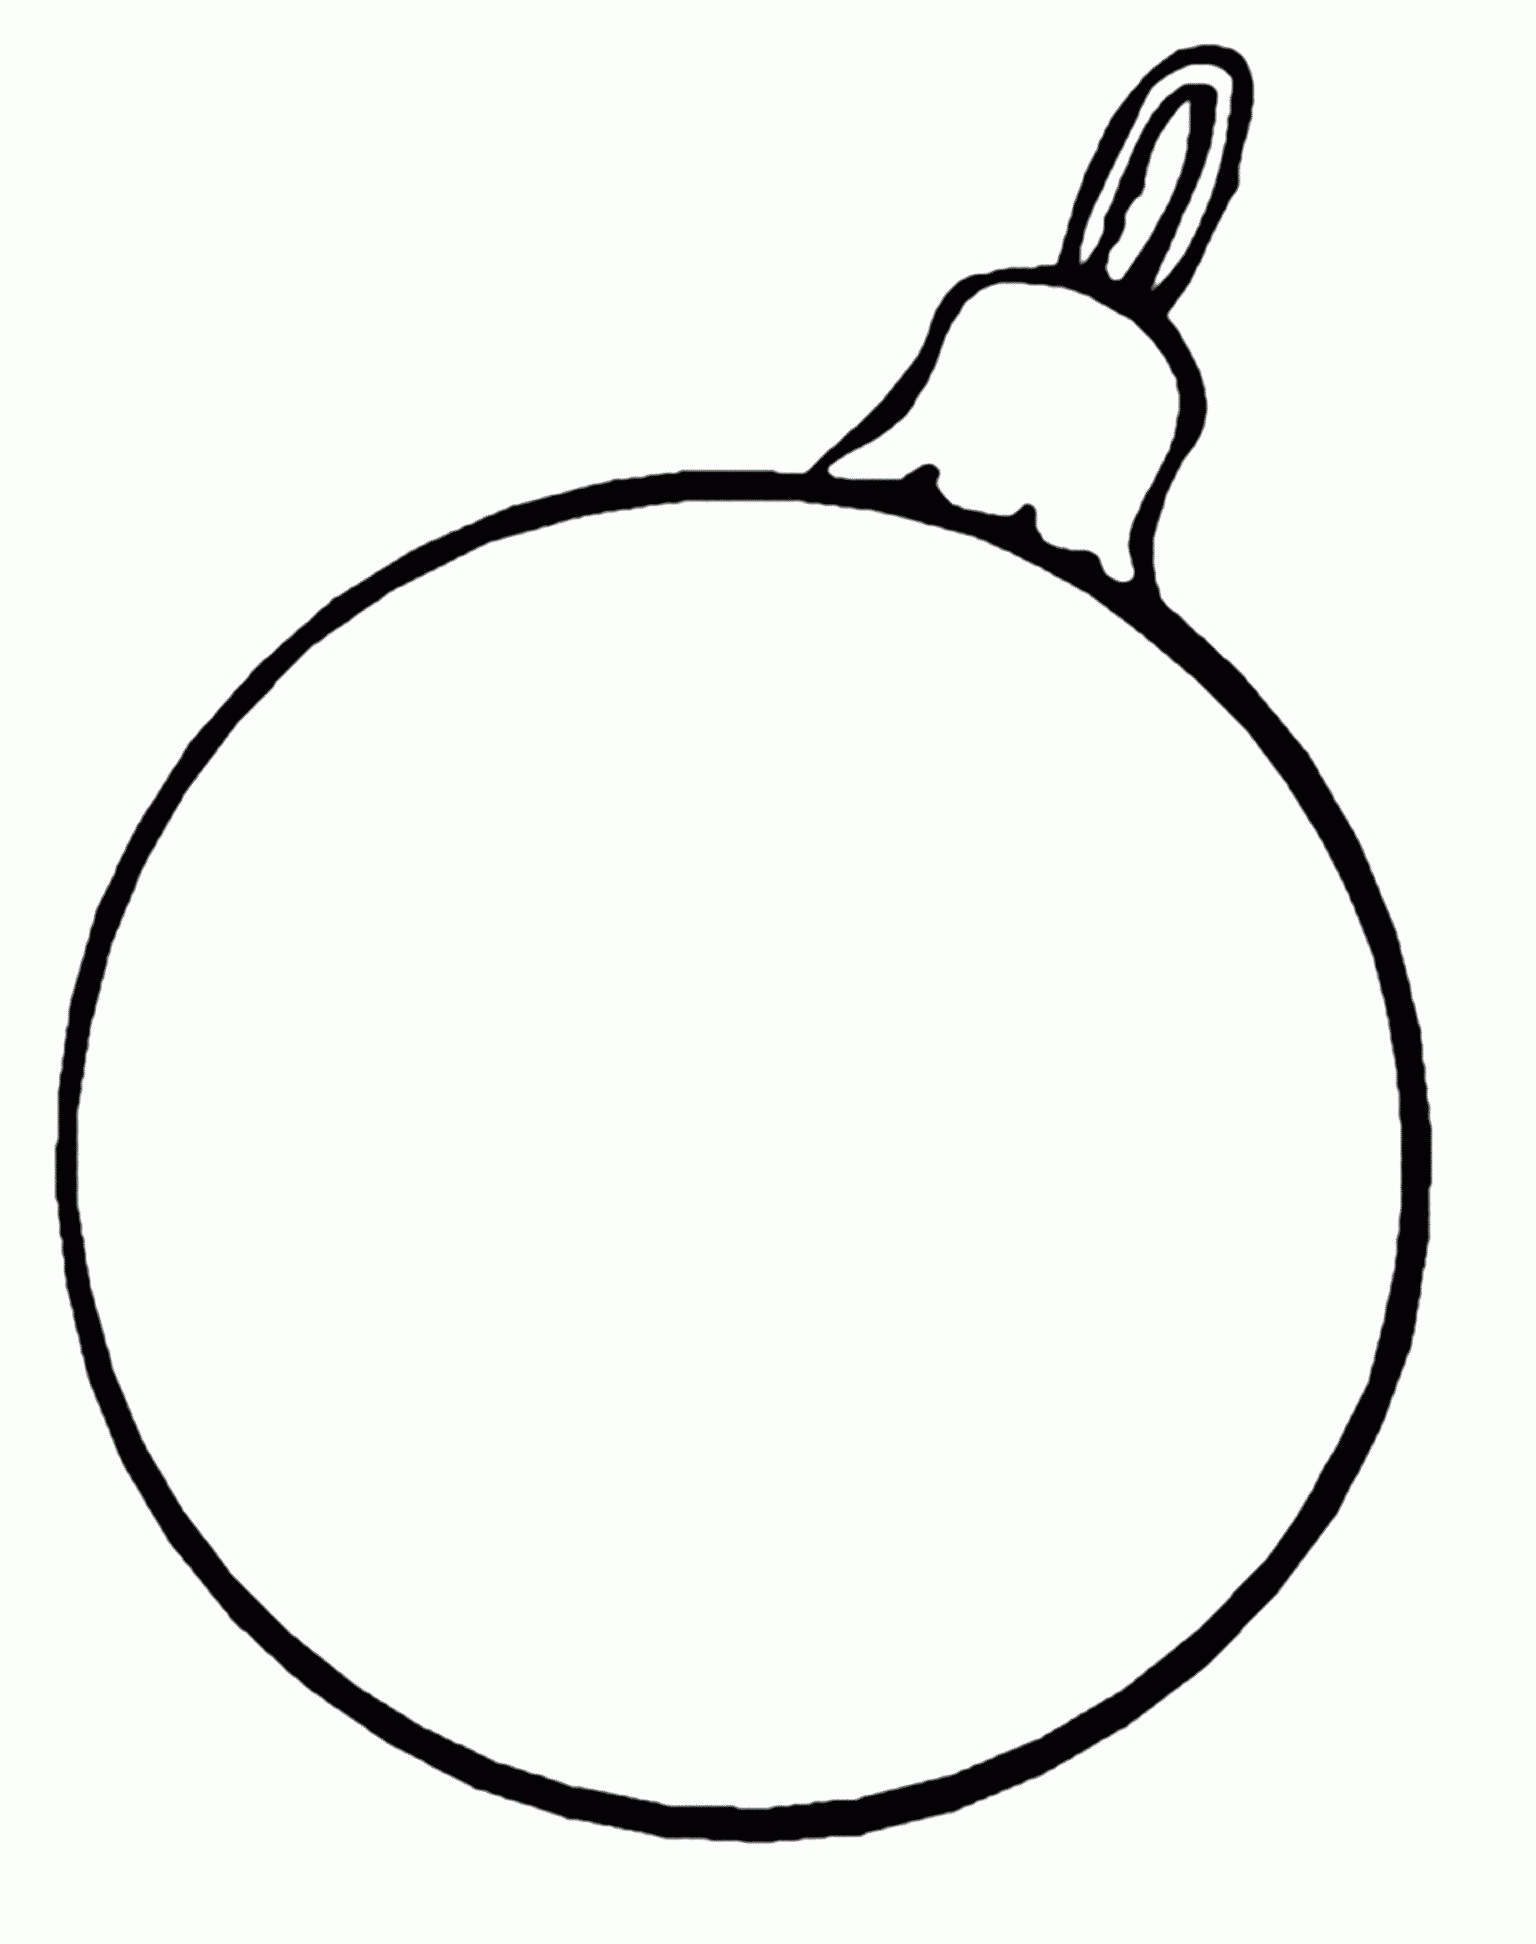 Christmas Ornament Coloring Pages For Girls   Coloring Pages For ...